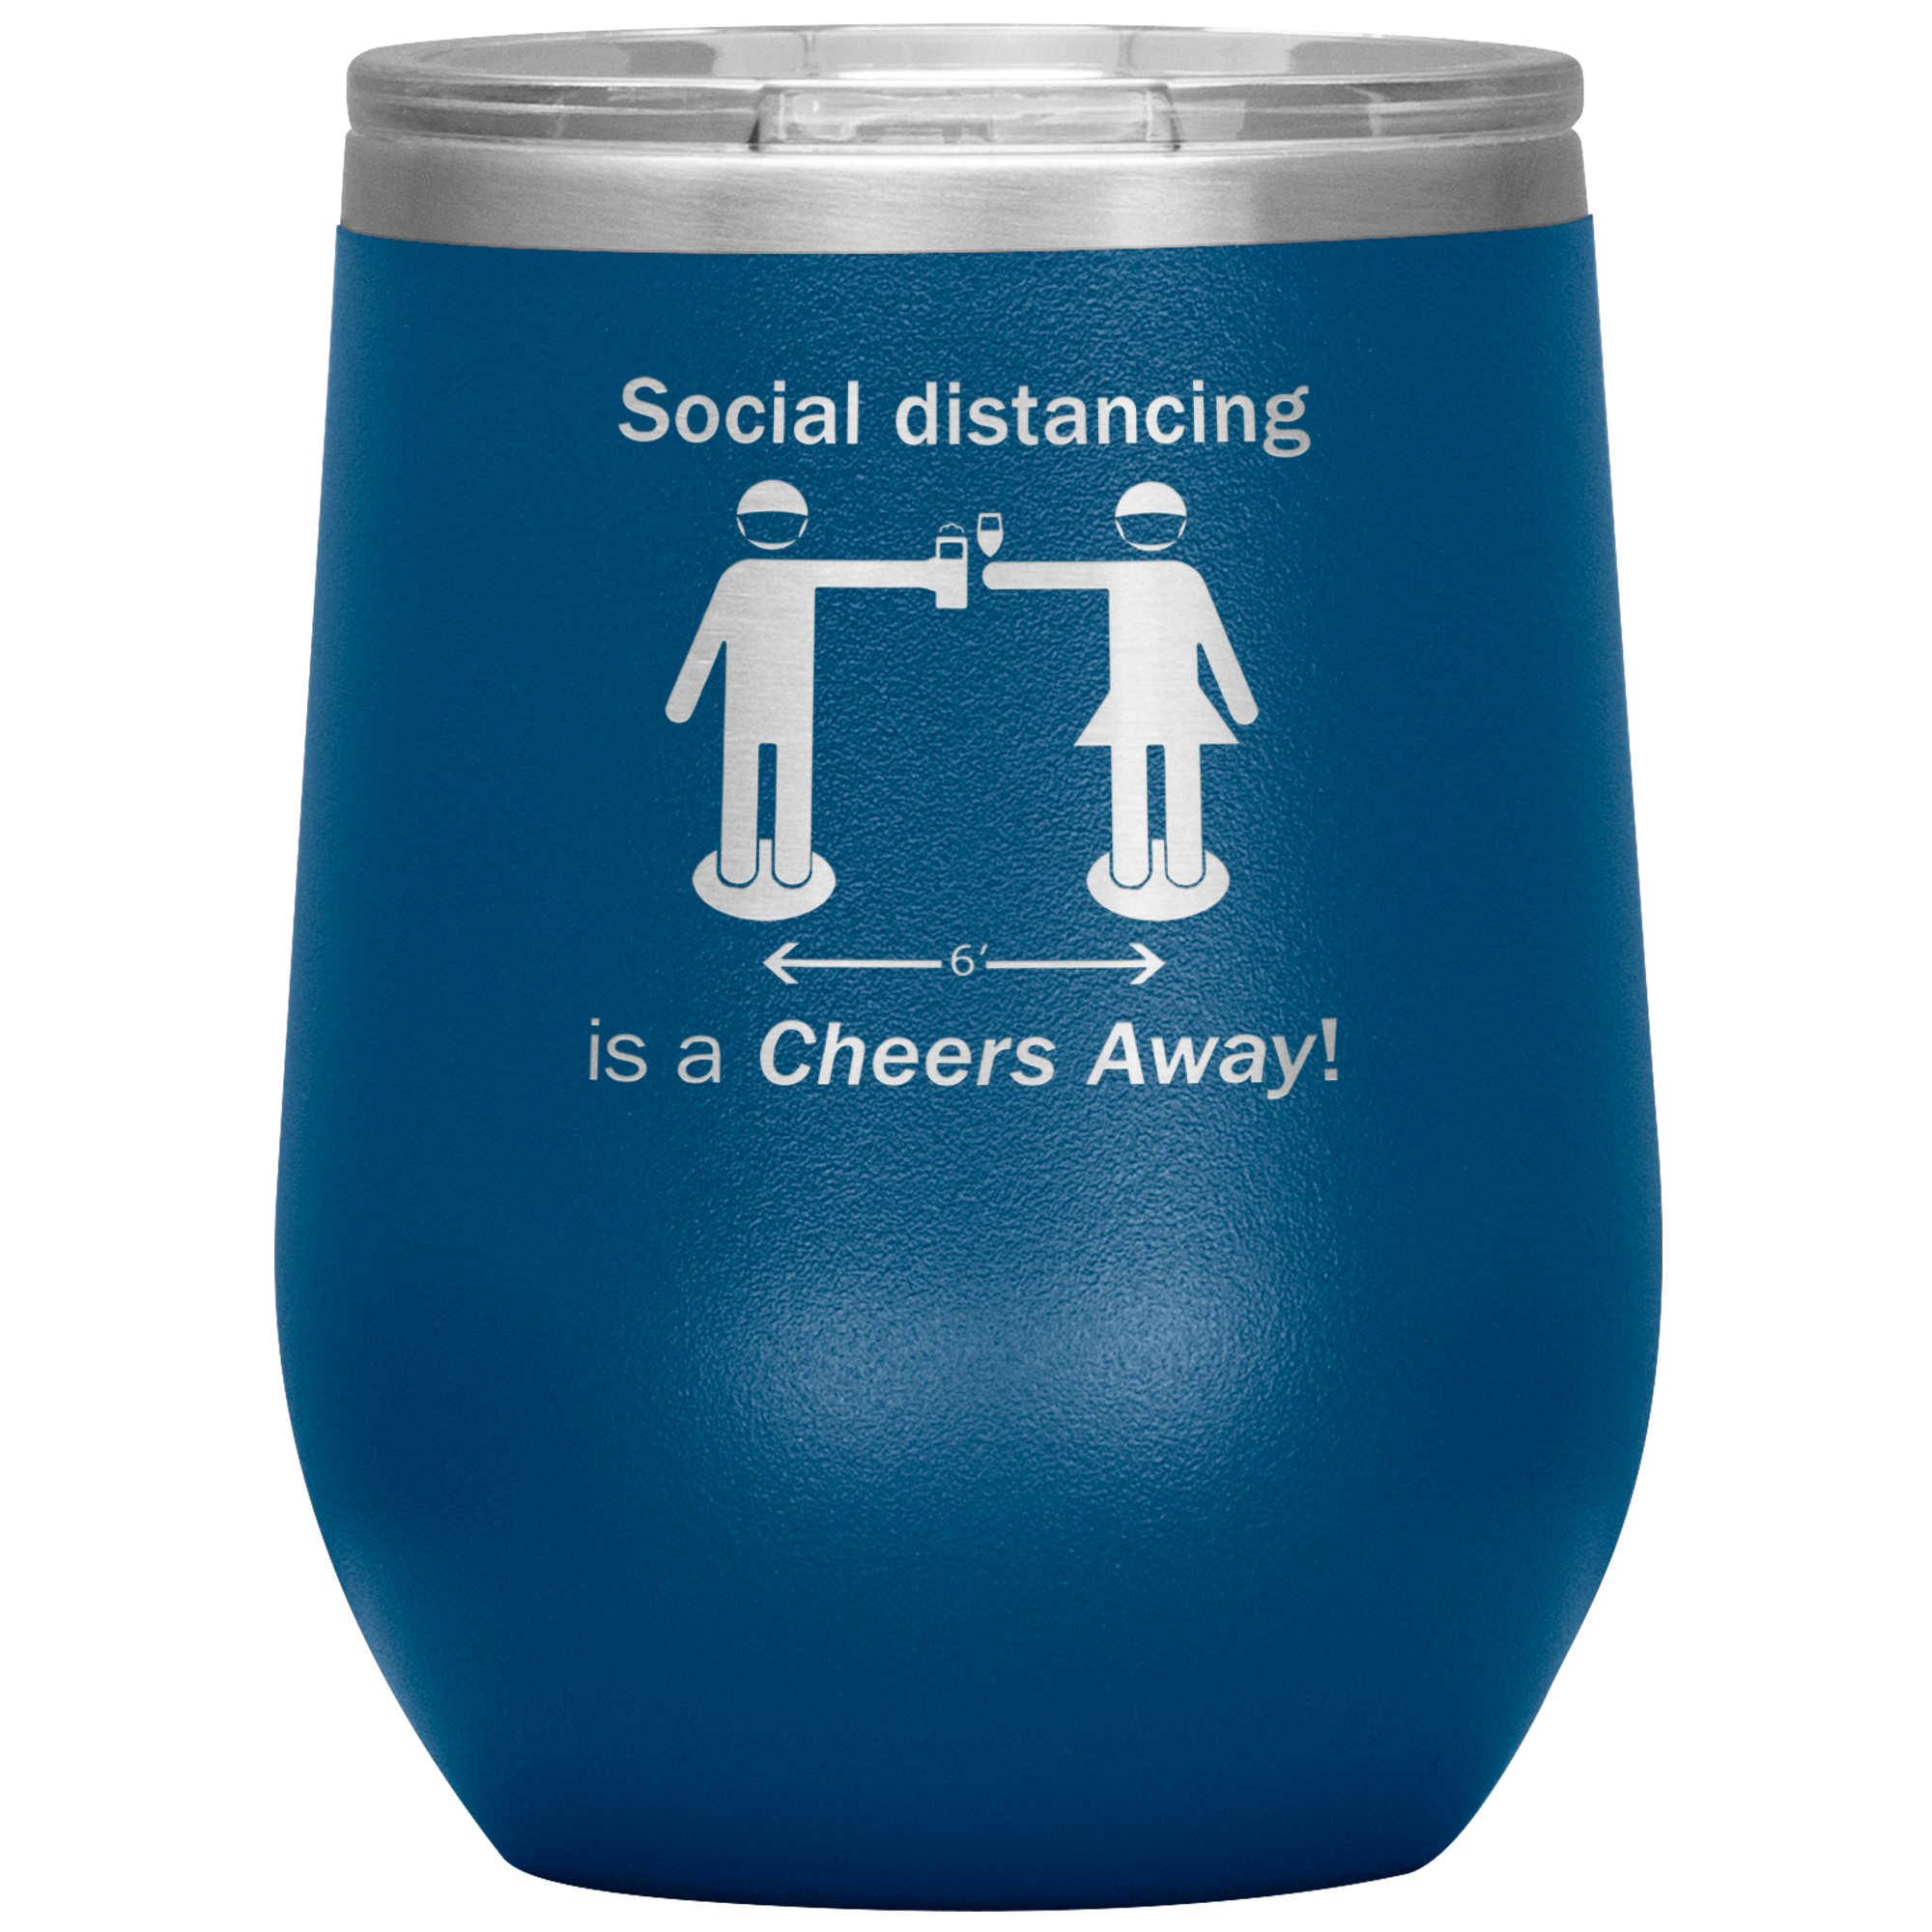 Cheers to Social Distancing